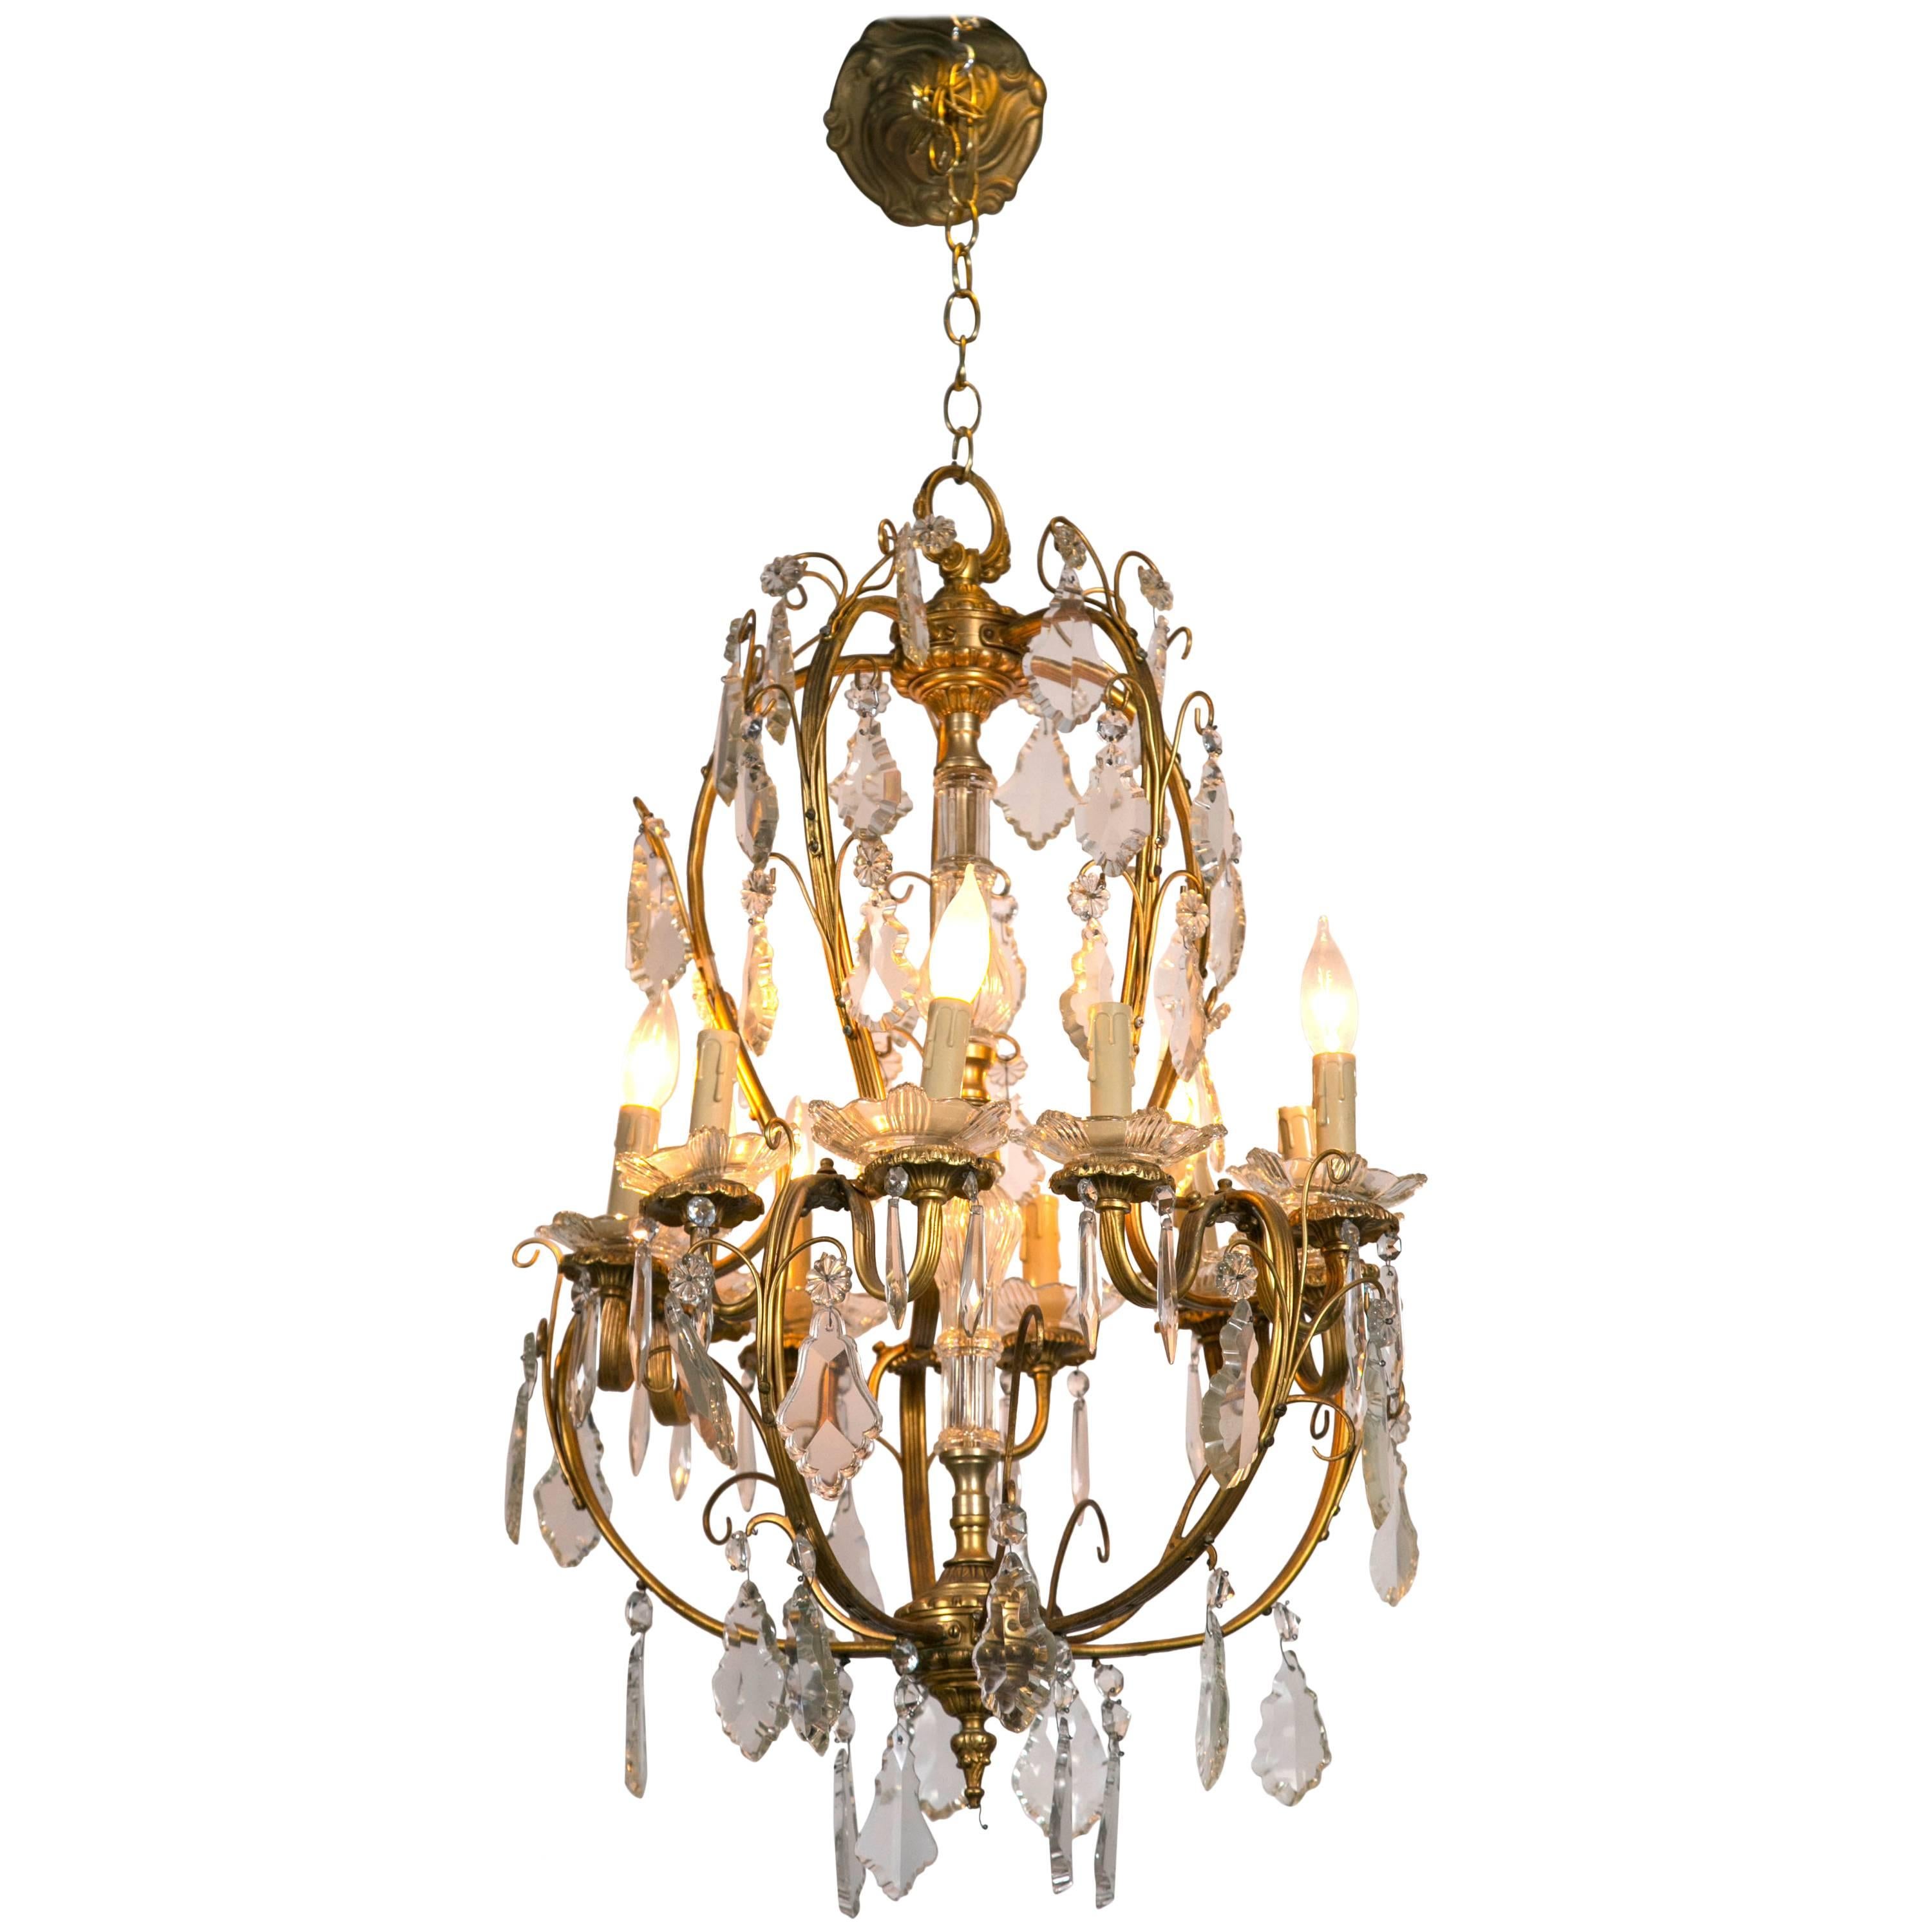 French Bronze and Crystal Chandelier in the Louis XVI Style